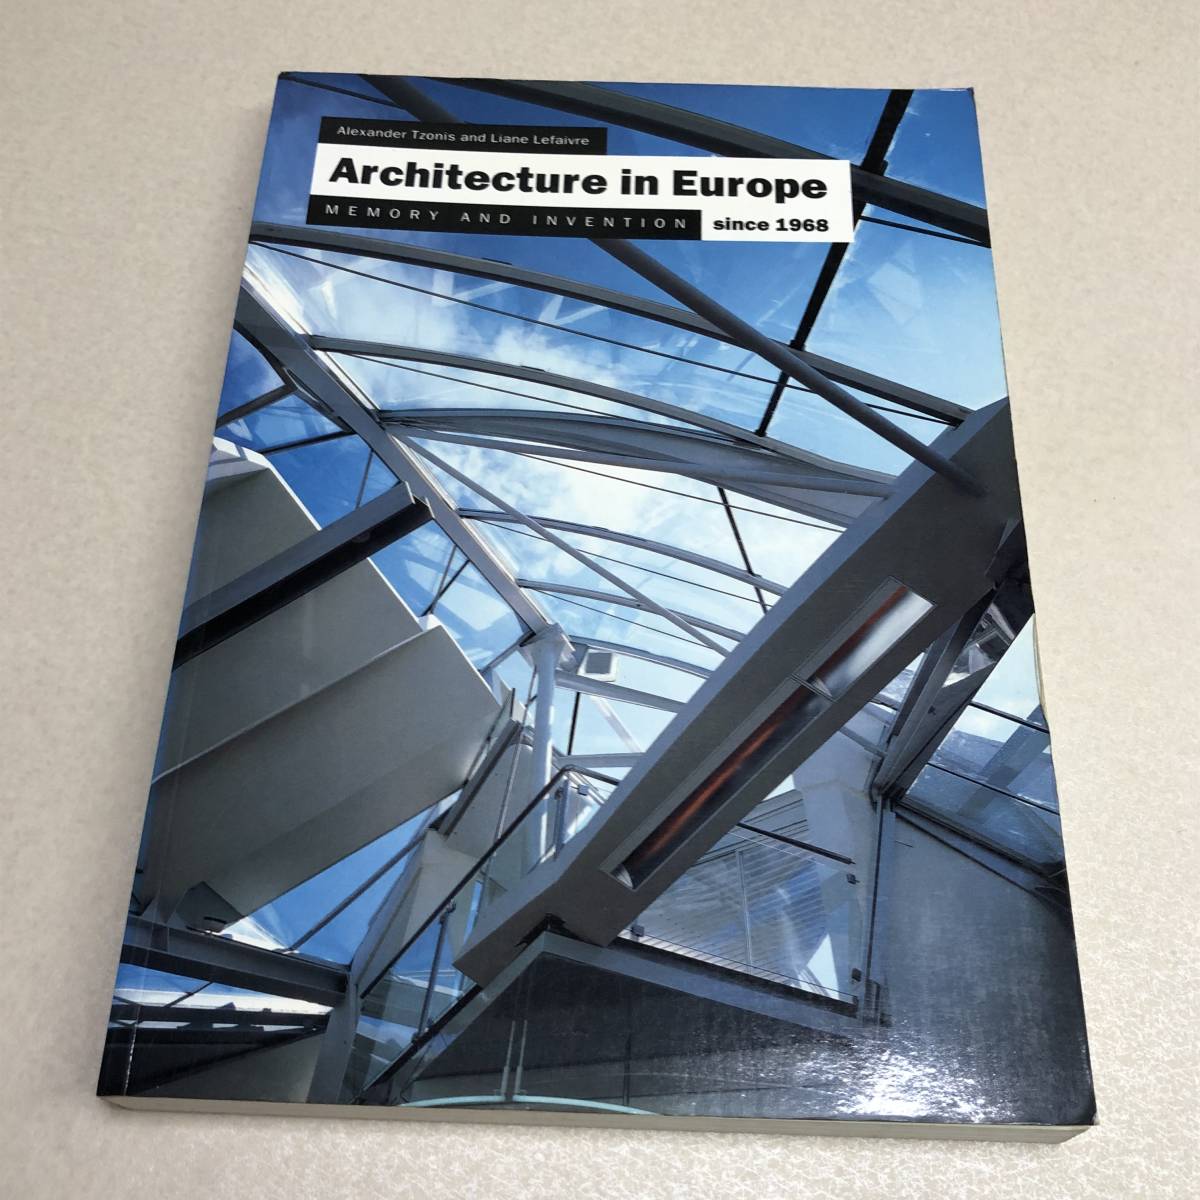 【Architecture in Europe memory and invention 洋書 ヨーロッパ 建築写真集】_画像1